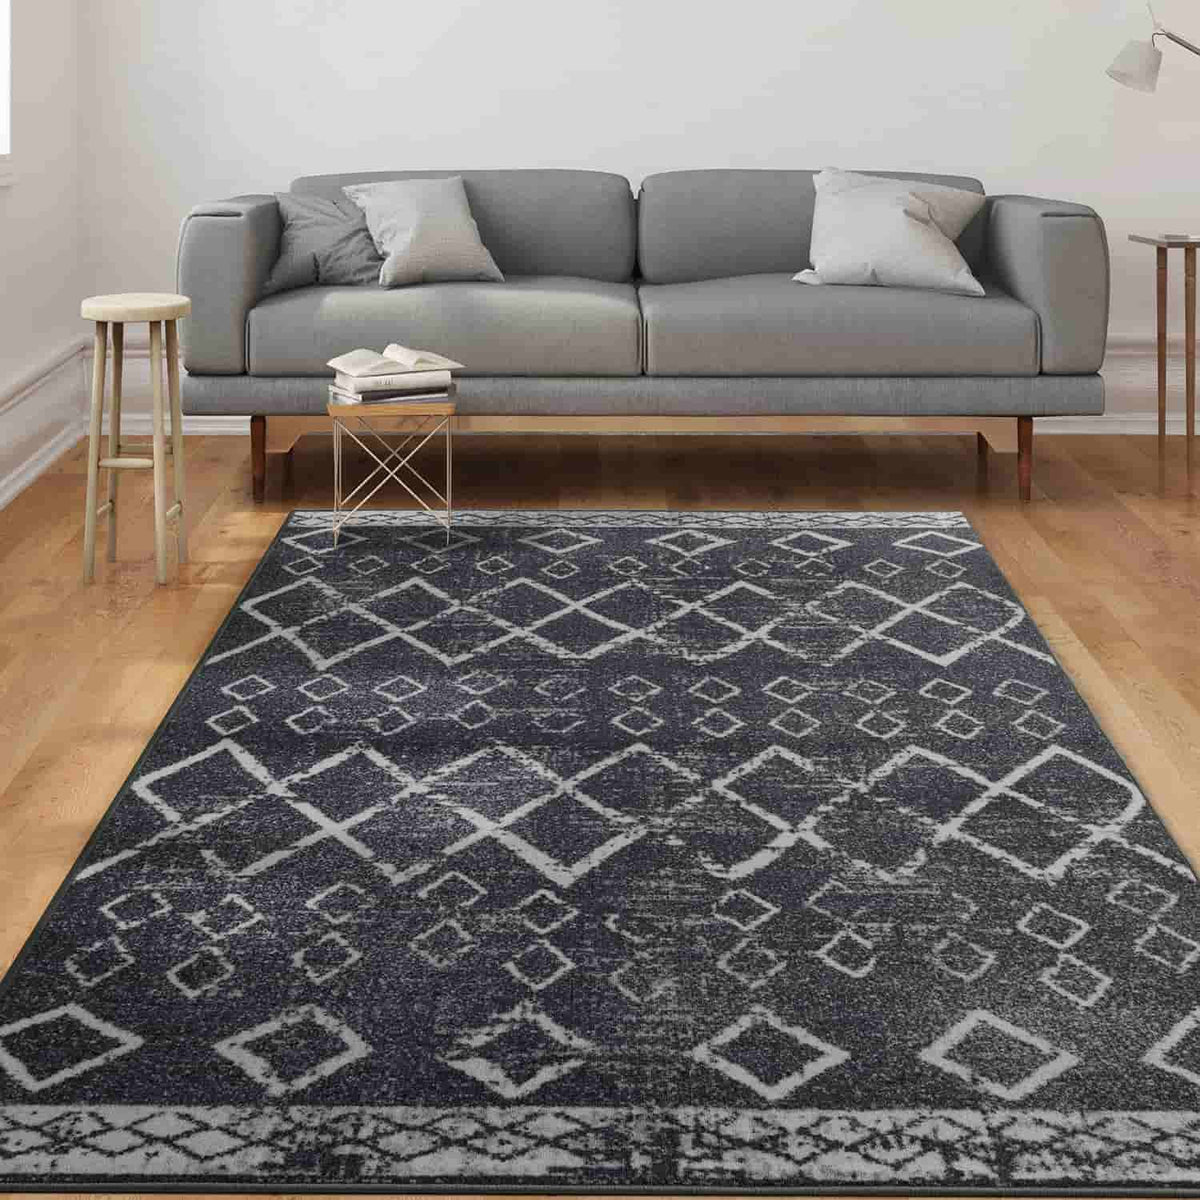 Antep Rugs Alfombras Non-Skid (Non-Slip) 3x5 Rubber Backing Floral  Geometric Low Profile Pile Indoor Area Rugs (Dark Green, 3' x 5')